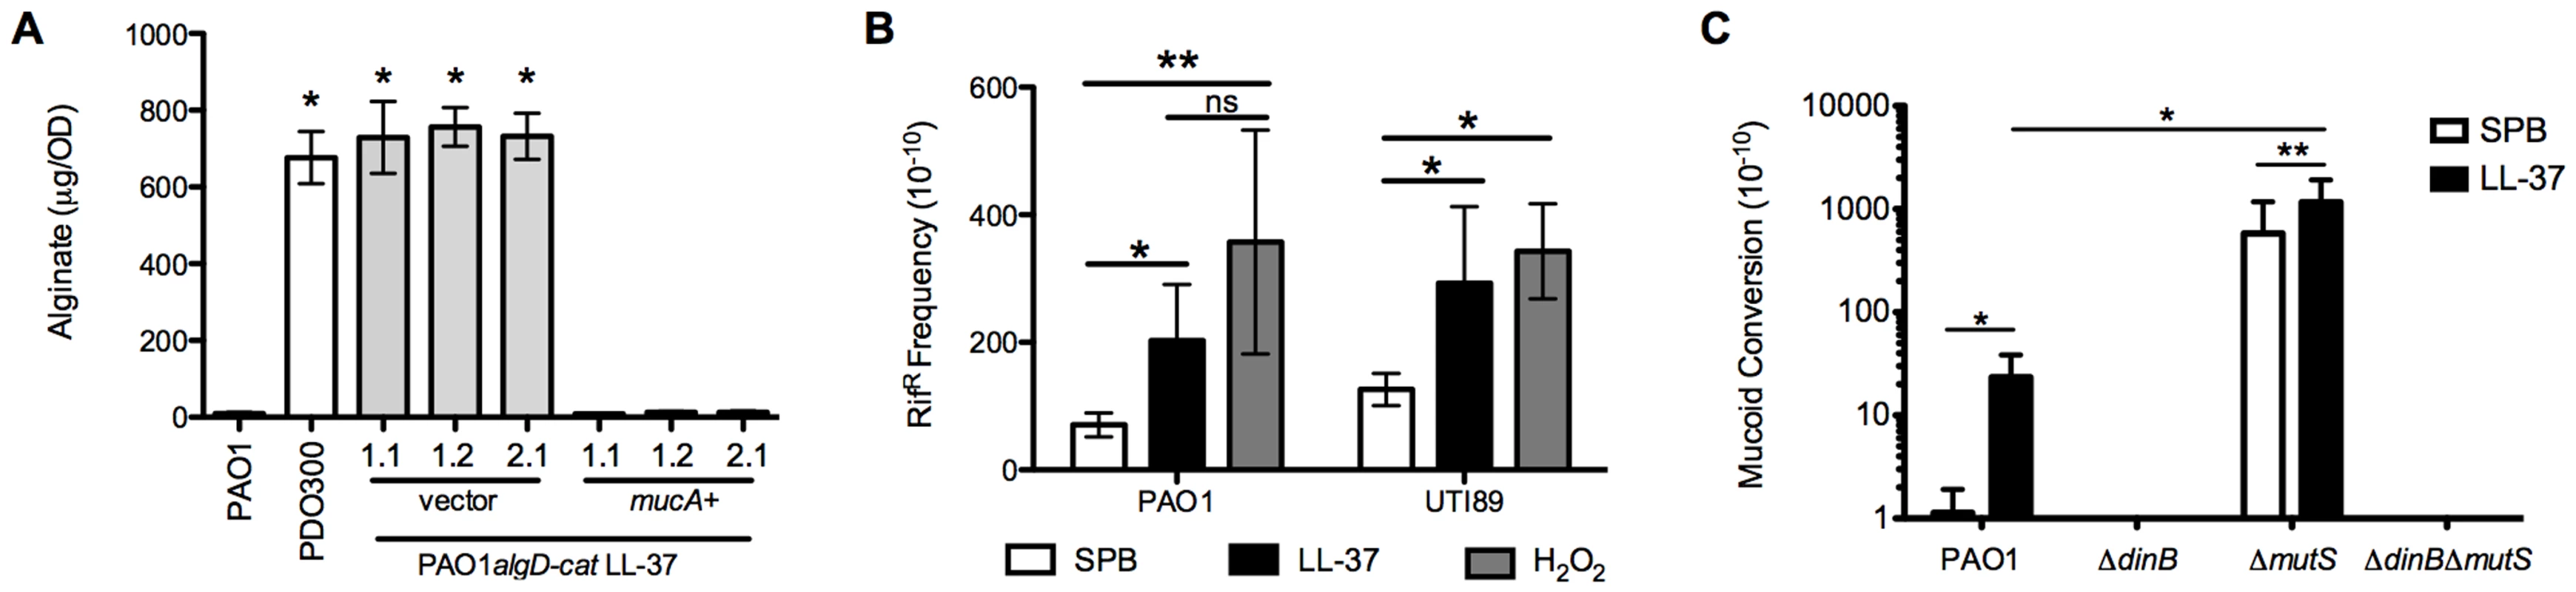 LL-37 induces bacterial mutagenesis in a DinB-dependent manner.